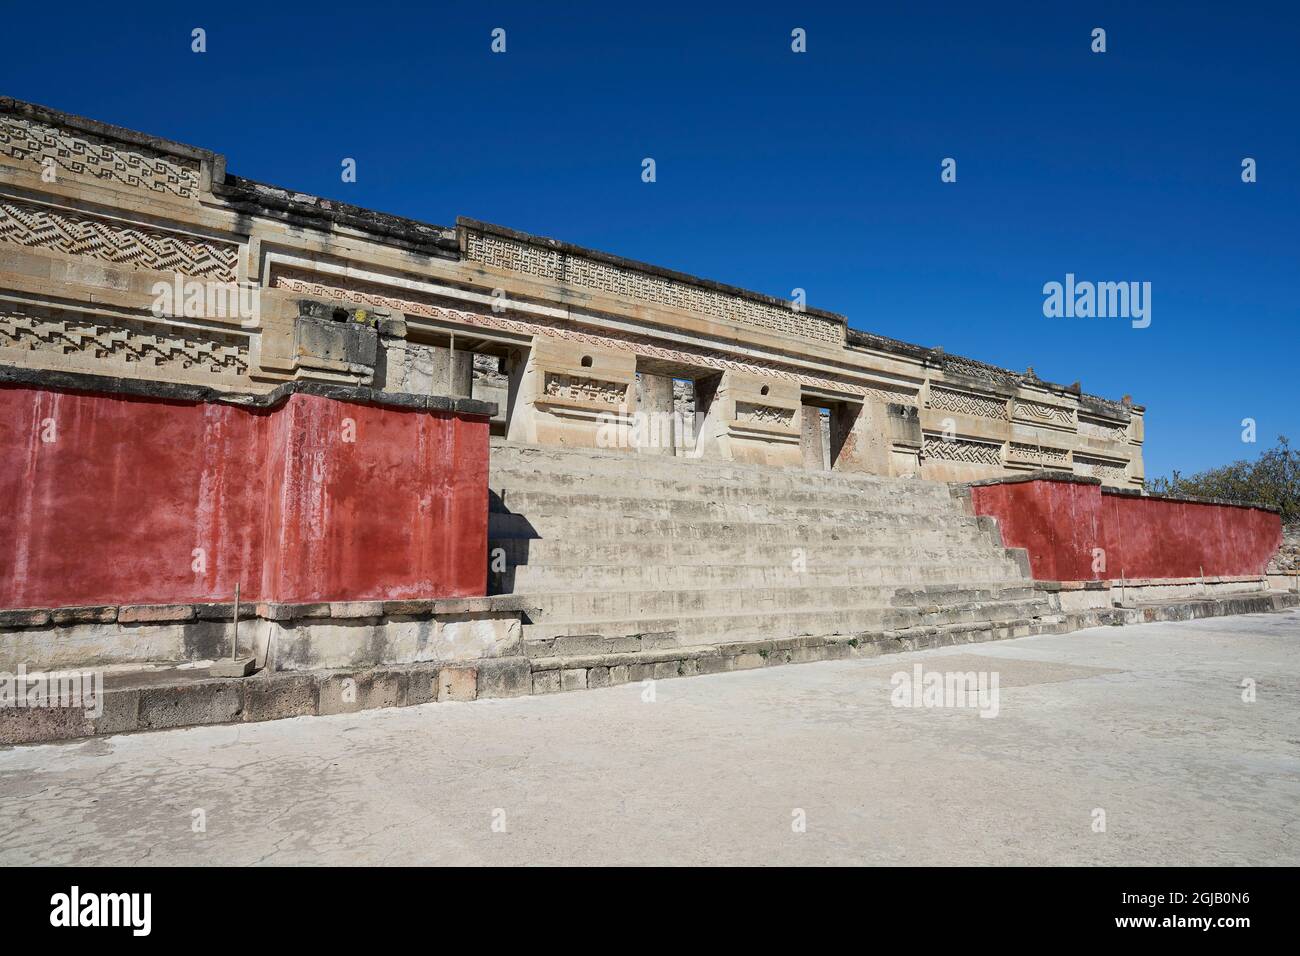 Mexico, San Pablo Villa de Mitla. Mitla is the most important archeological site of Zapotec culture, notable for its intricate mosaic fretwork and geo Stock Photo